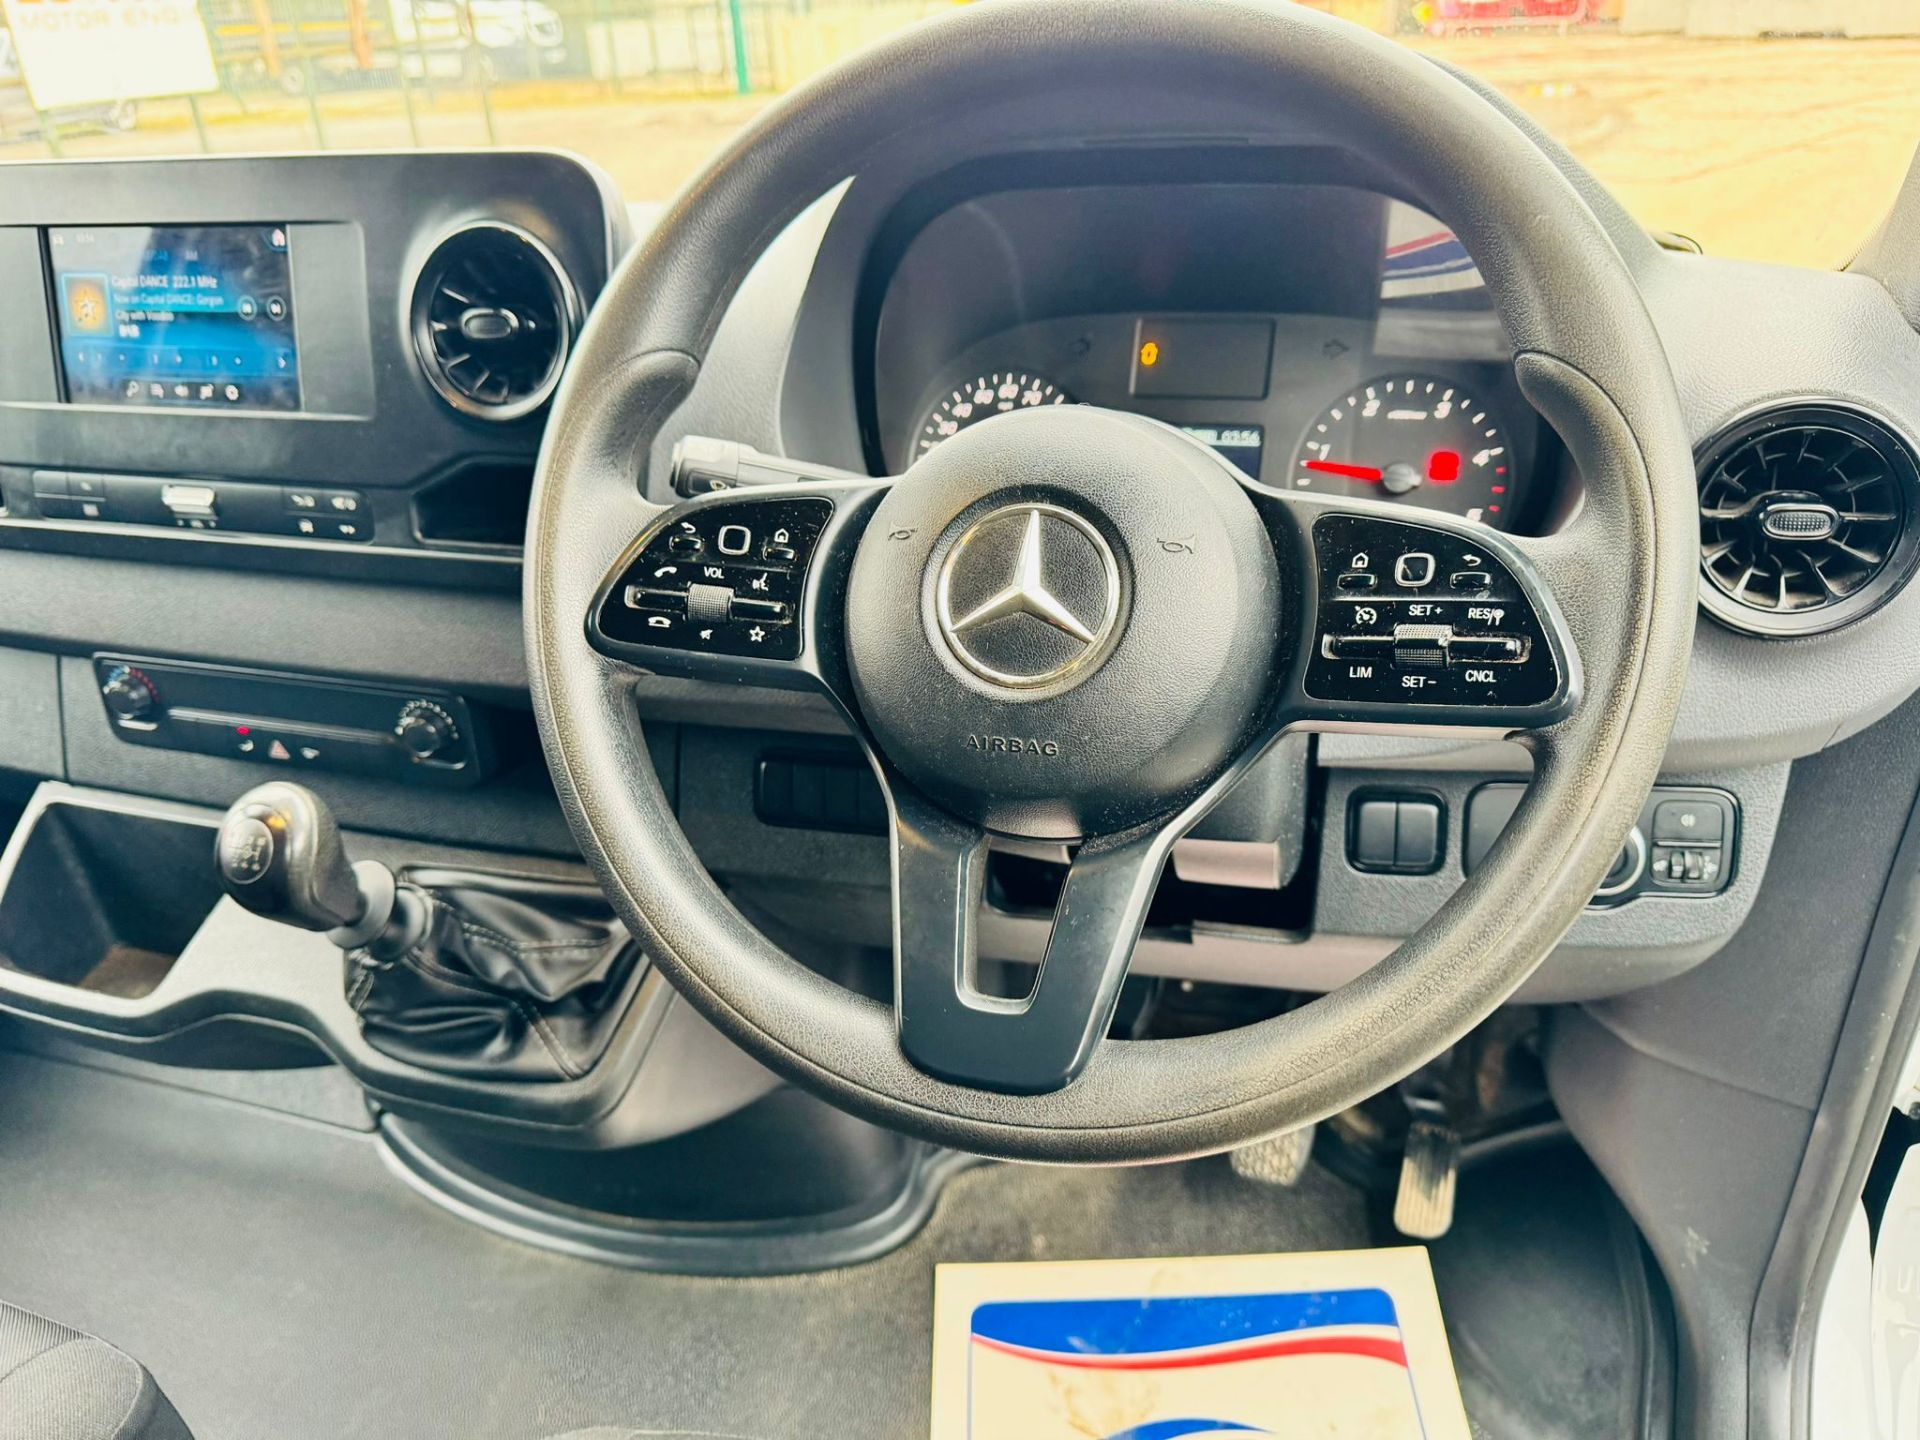 MERCEDES SPRINTER 314CDI MWB HI ROOF - 2019 19 Reg - 1 Owner From New - Euro 6 - NEW SHAPE!! - Image 5 of 8